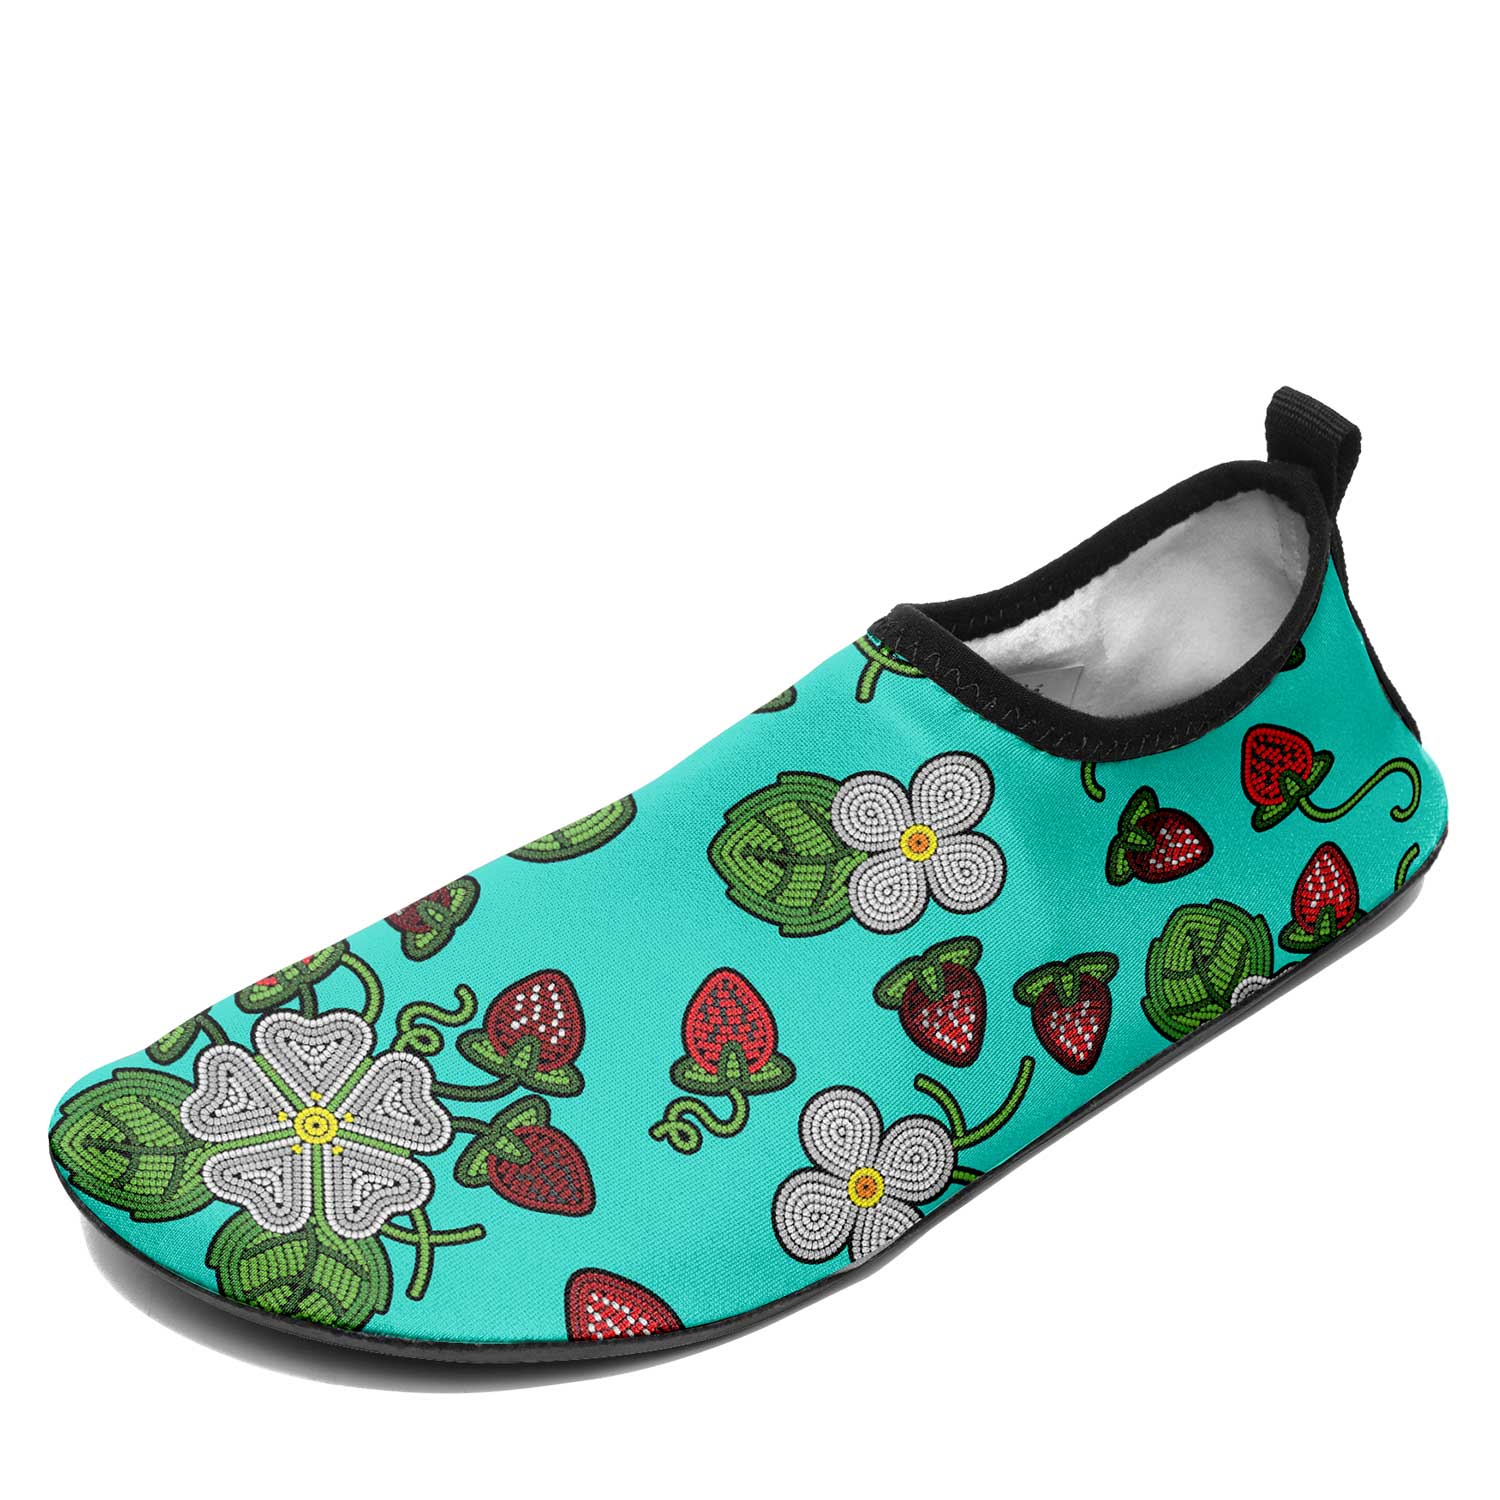 Strawberry Dreams Turquoise Kid's Sockamoccs Slip On Shoes